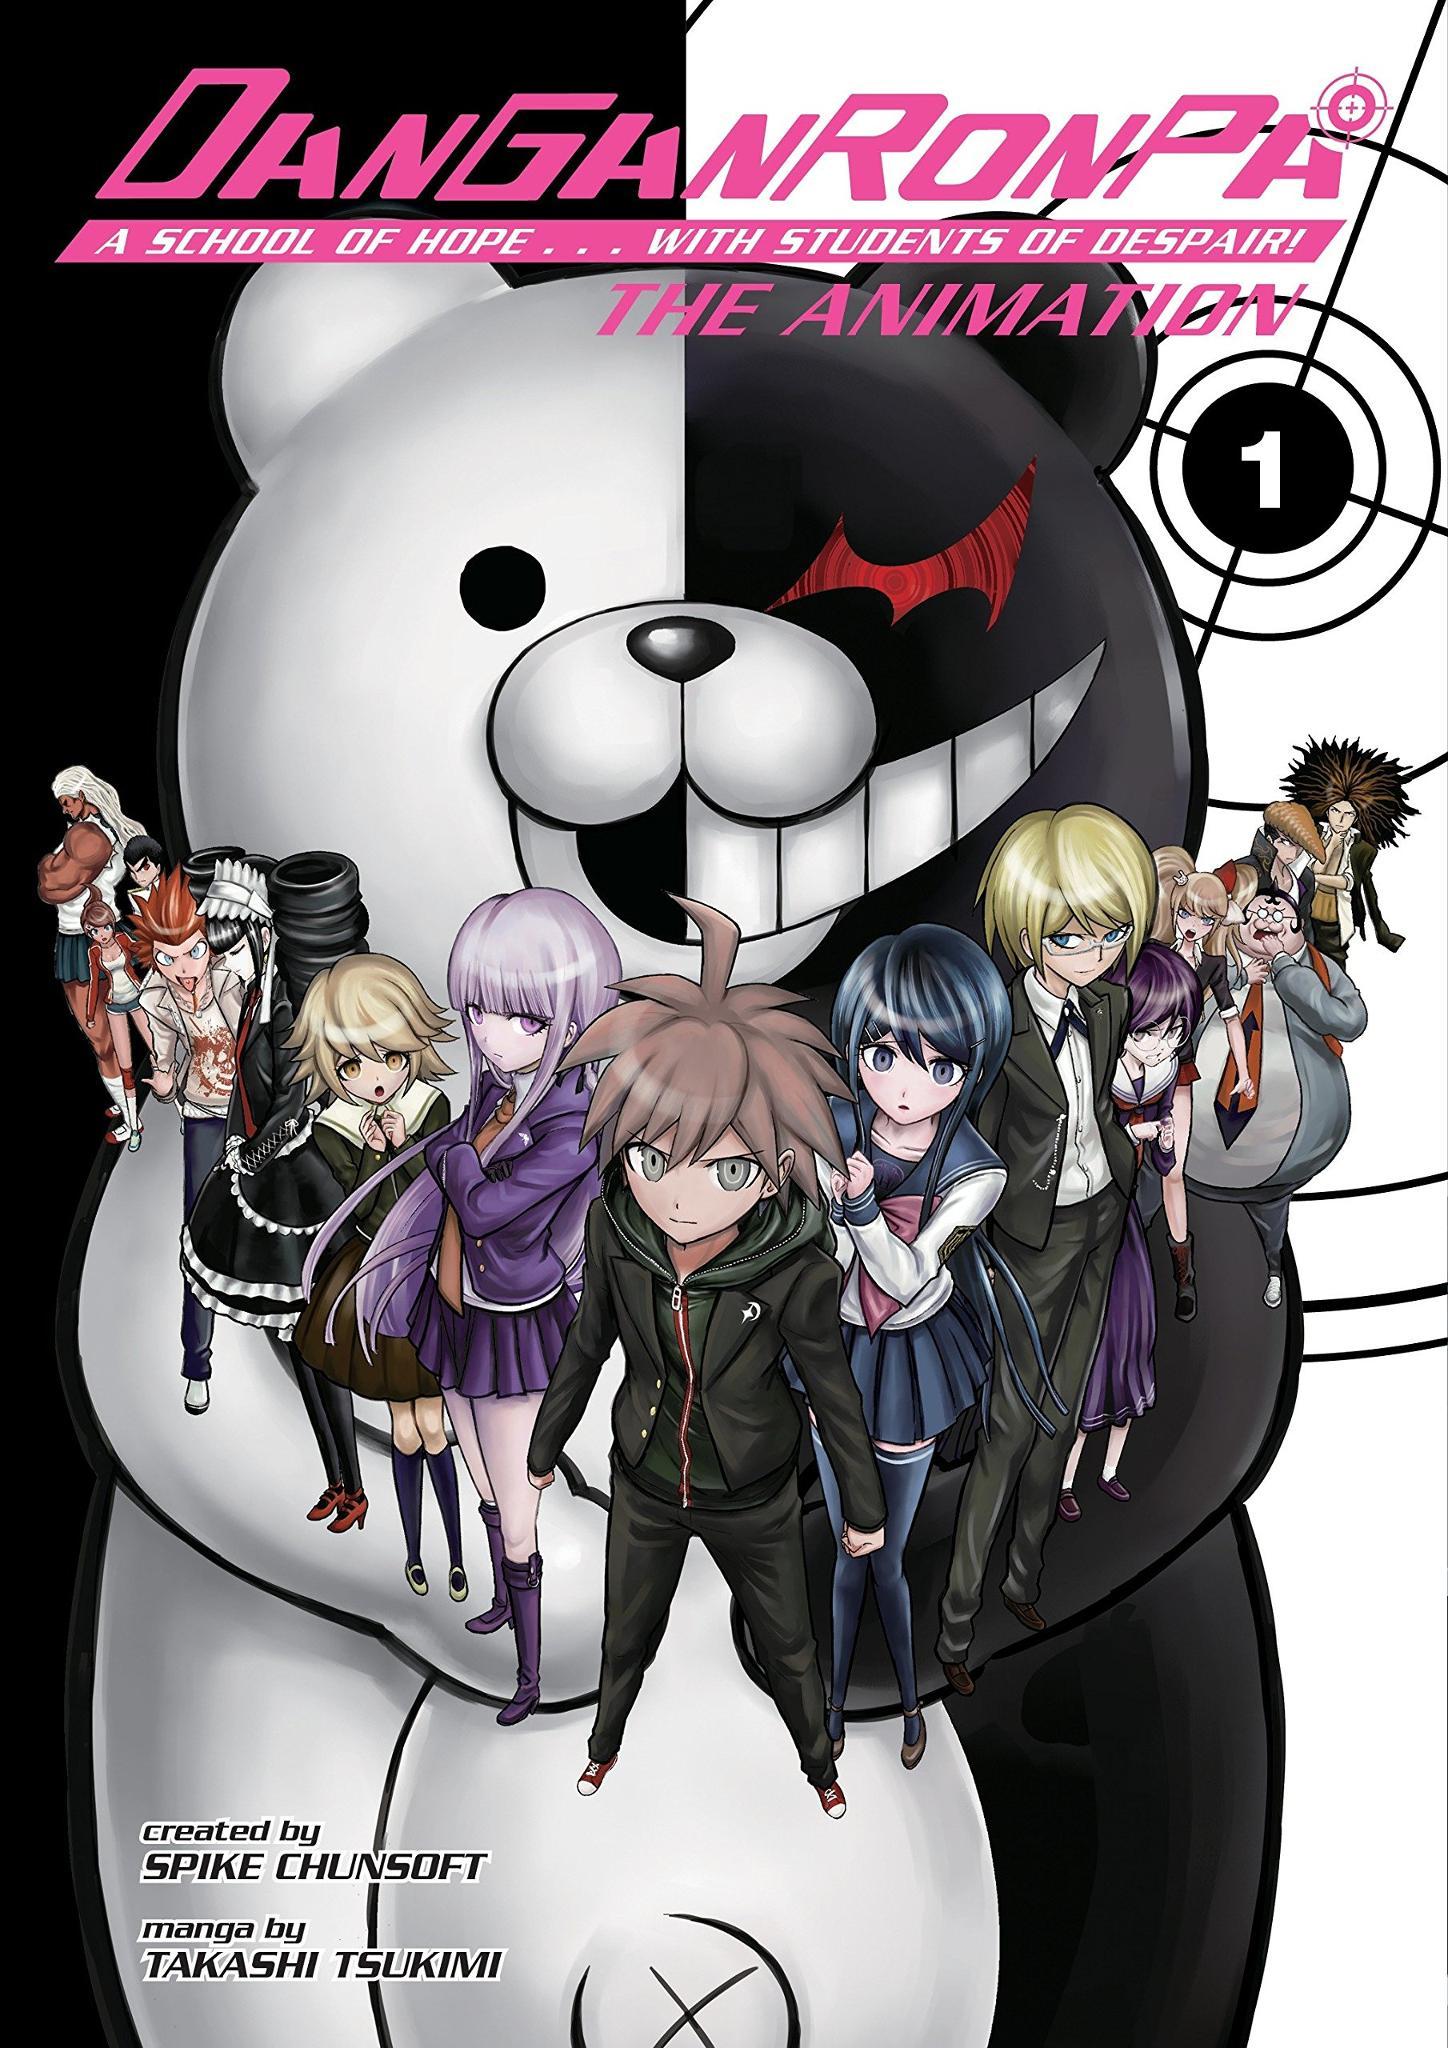 Would You Survive The Killing Games In Danganronpa? - Personality Quiz